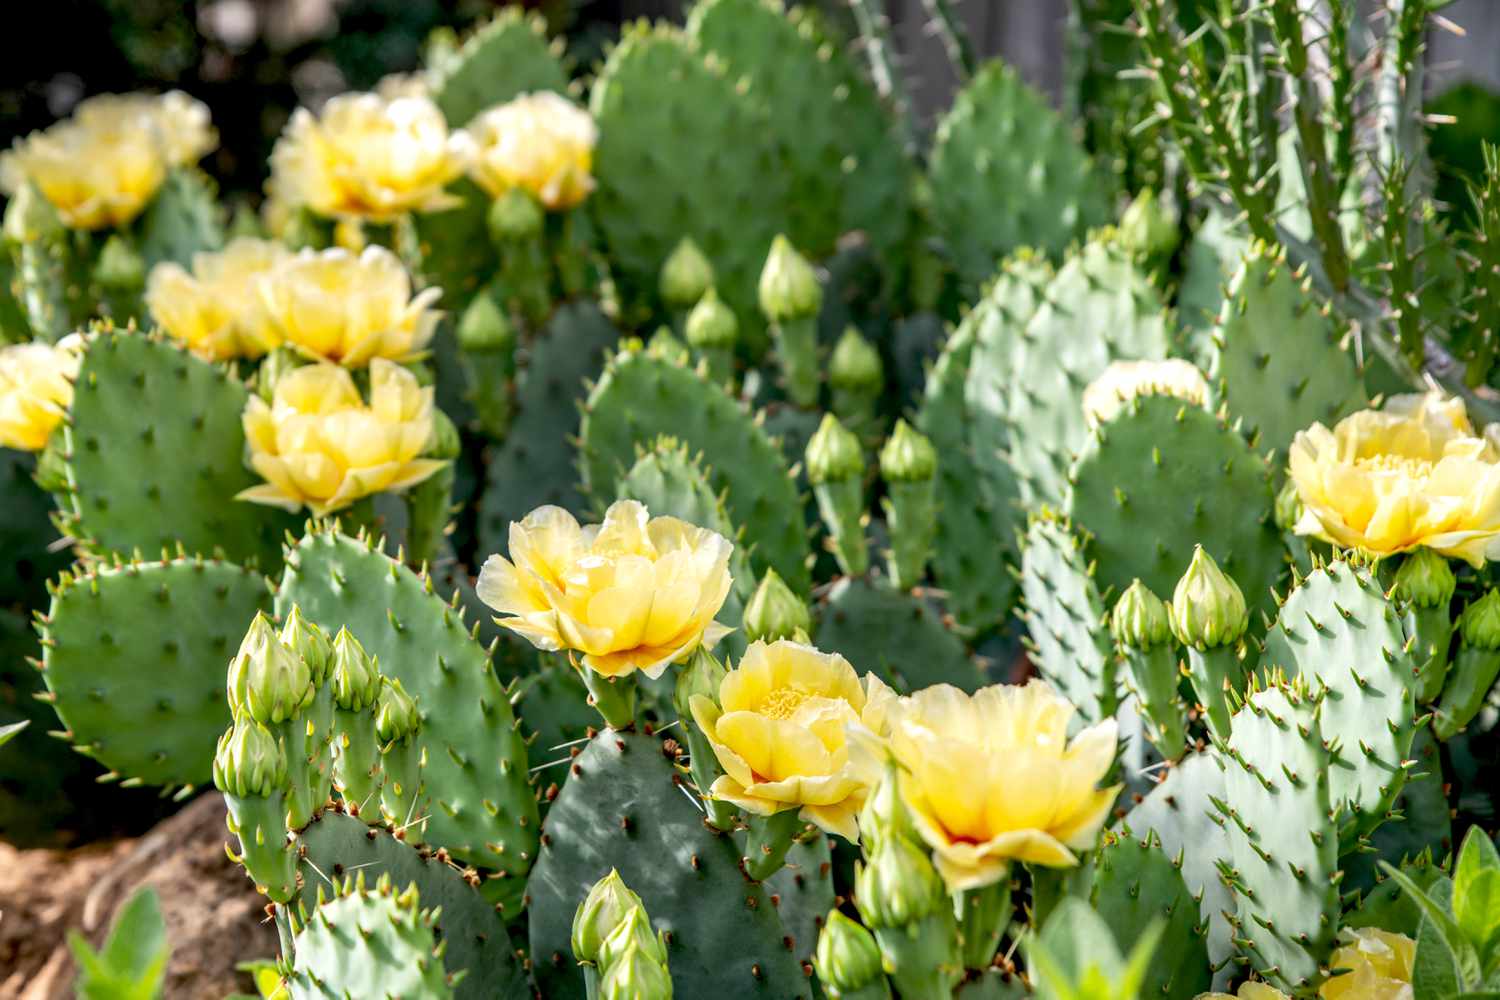 How To Plant A Prickly Pear Cactus